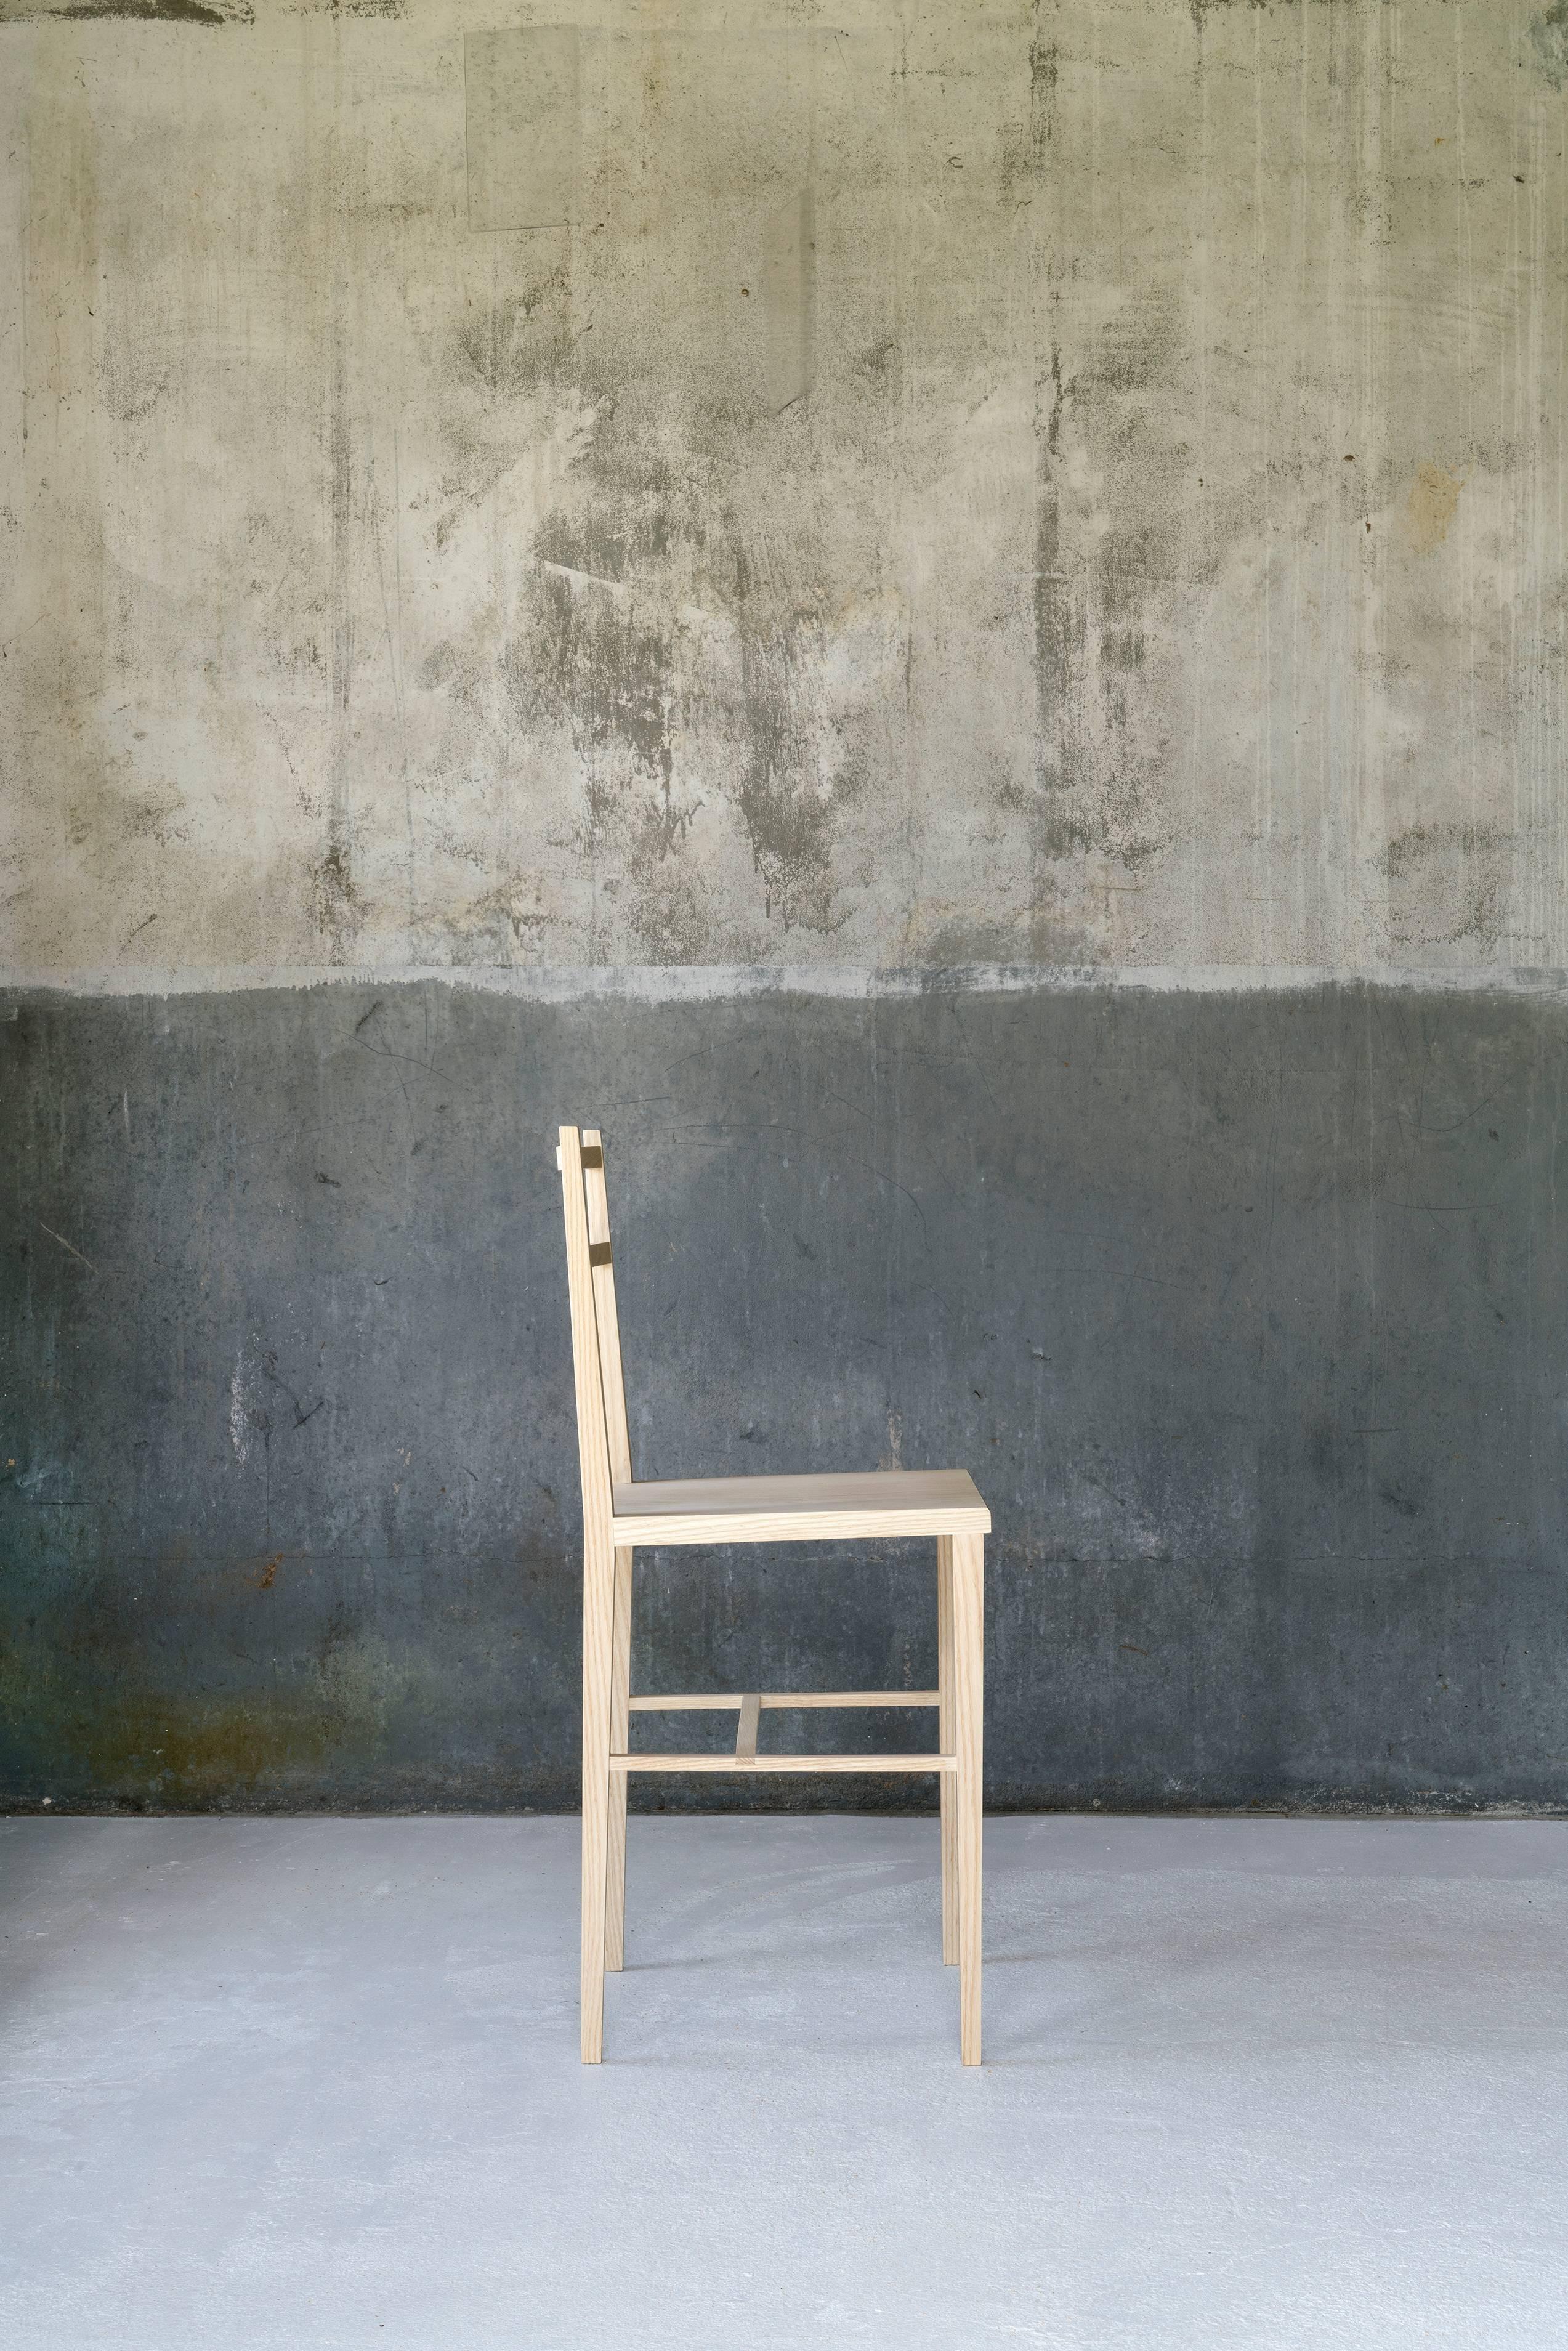 Constructed by a master craftsman as well as talented sculptor - the simplicity and elegance of these chairs can only come to life with the very best of his talent. He uses traditional joinery and thoughtful consideration to attain the precision